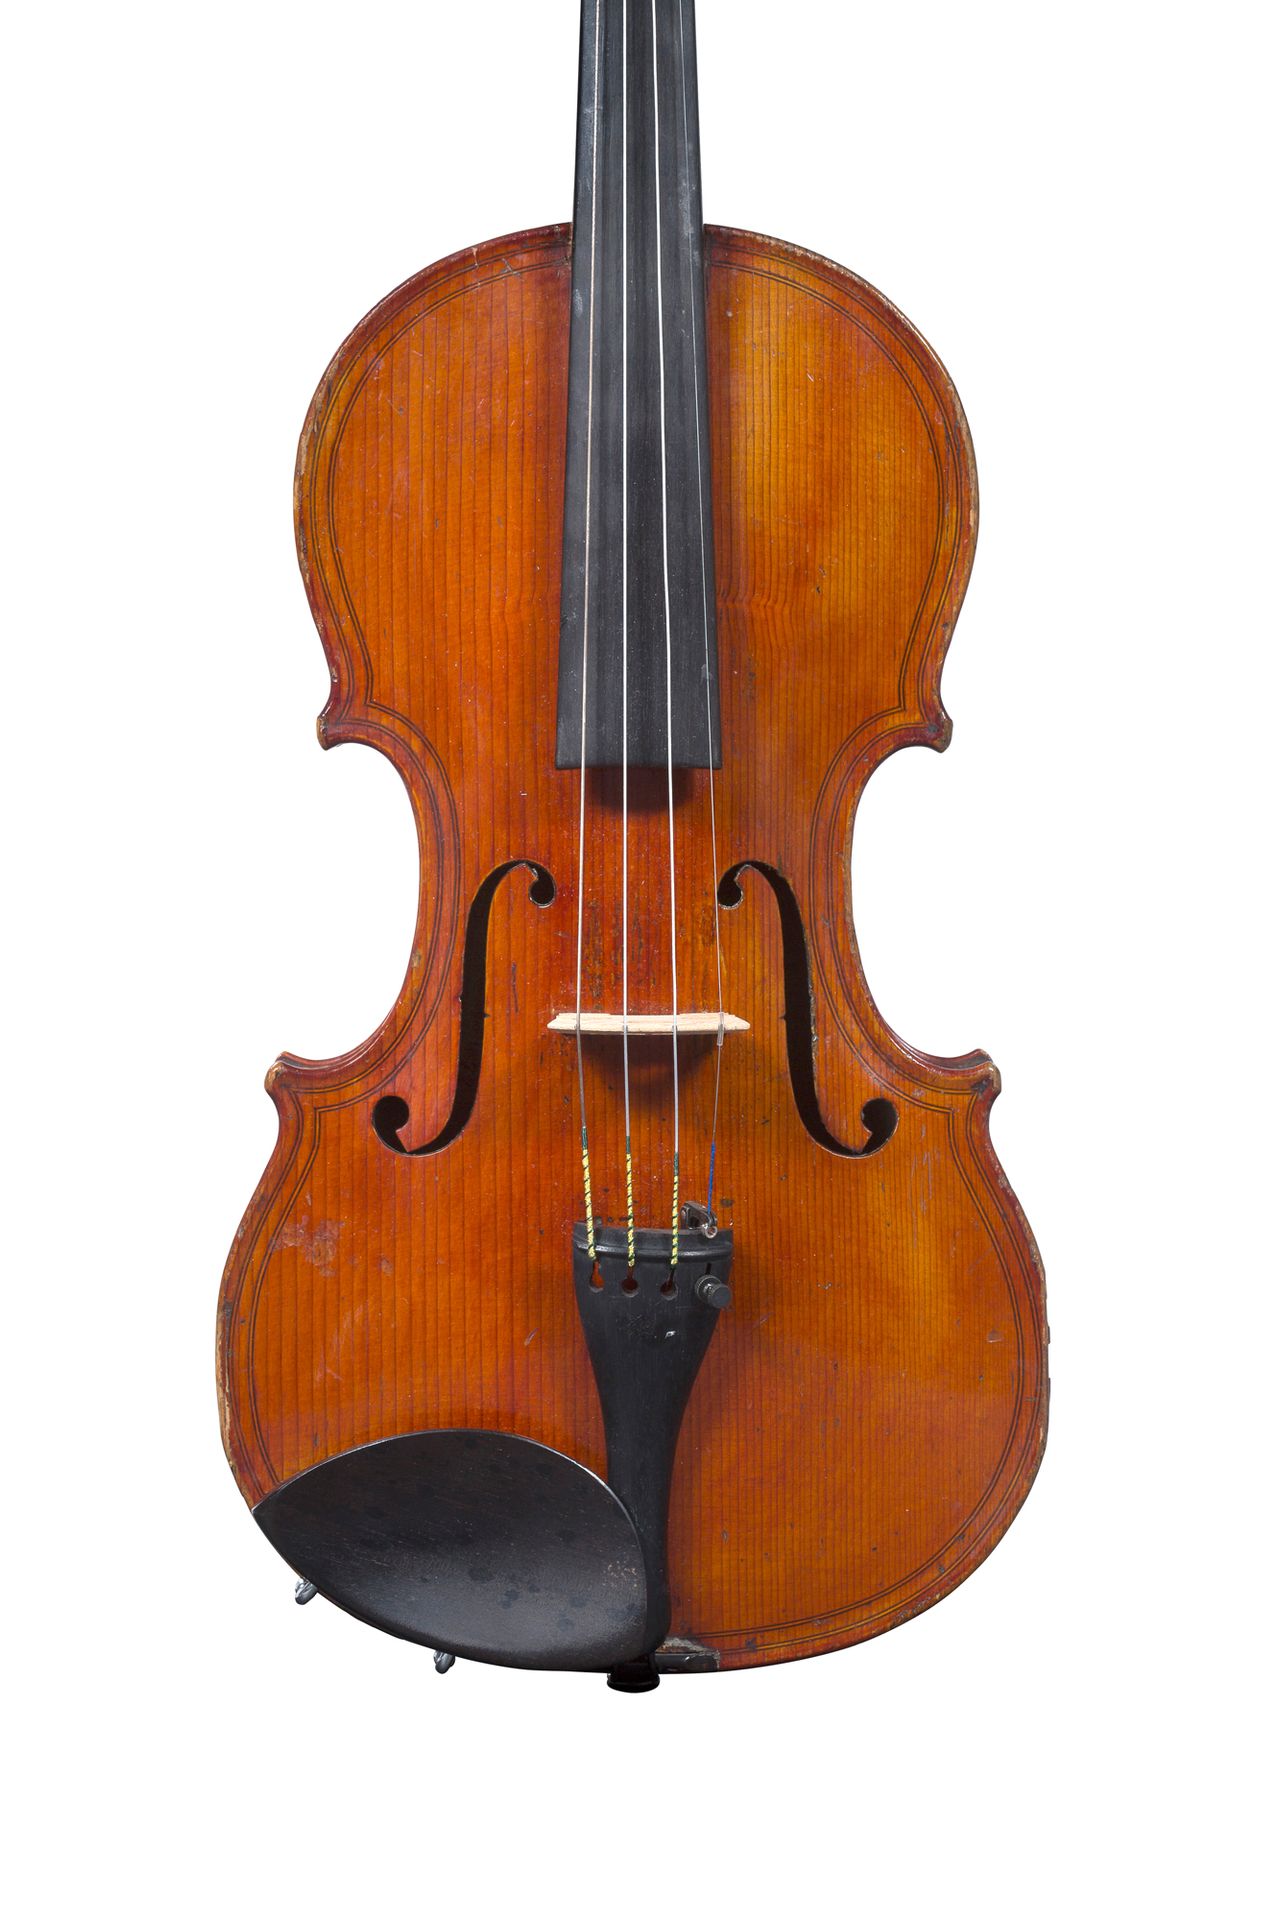 Null A French Violin by Nicolas Mauchand, Mirecourt circa 1820-30